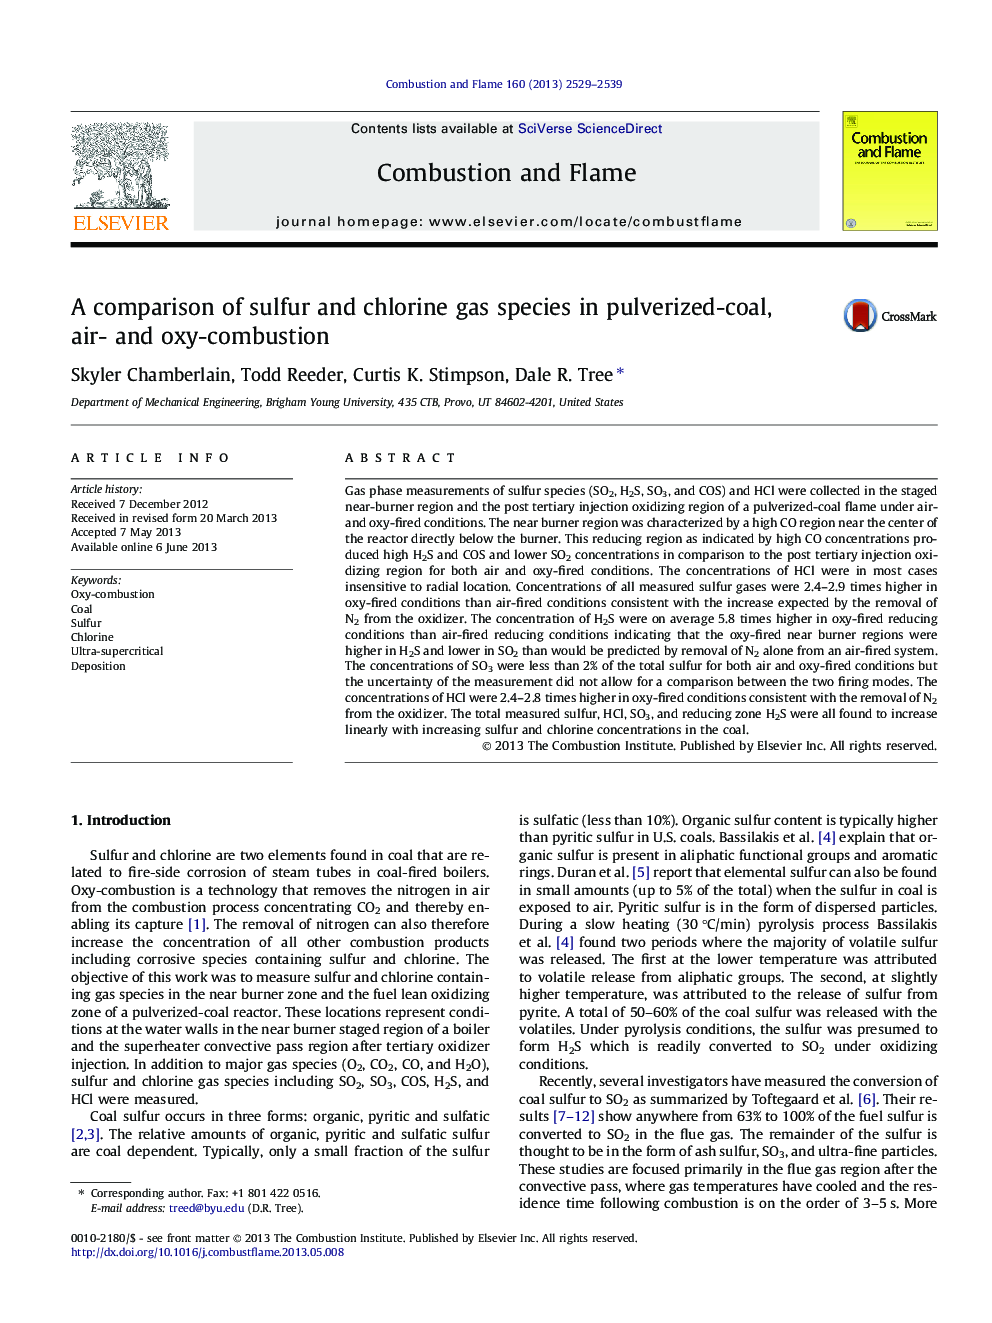 A comparison of sulfur and chlorine gas species in pulverized-coal, air- and oxy-combustion